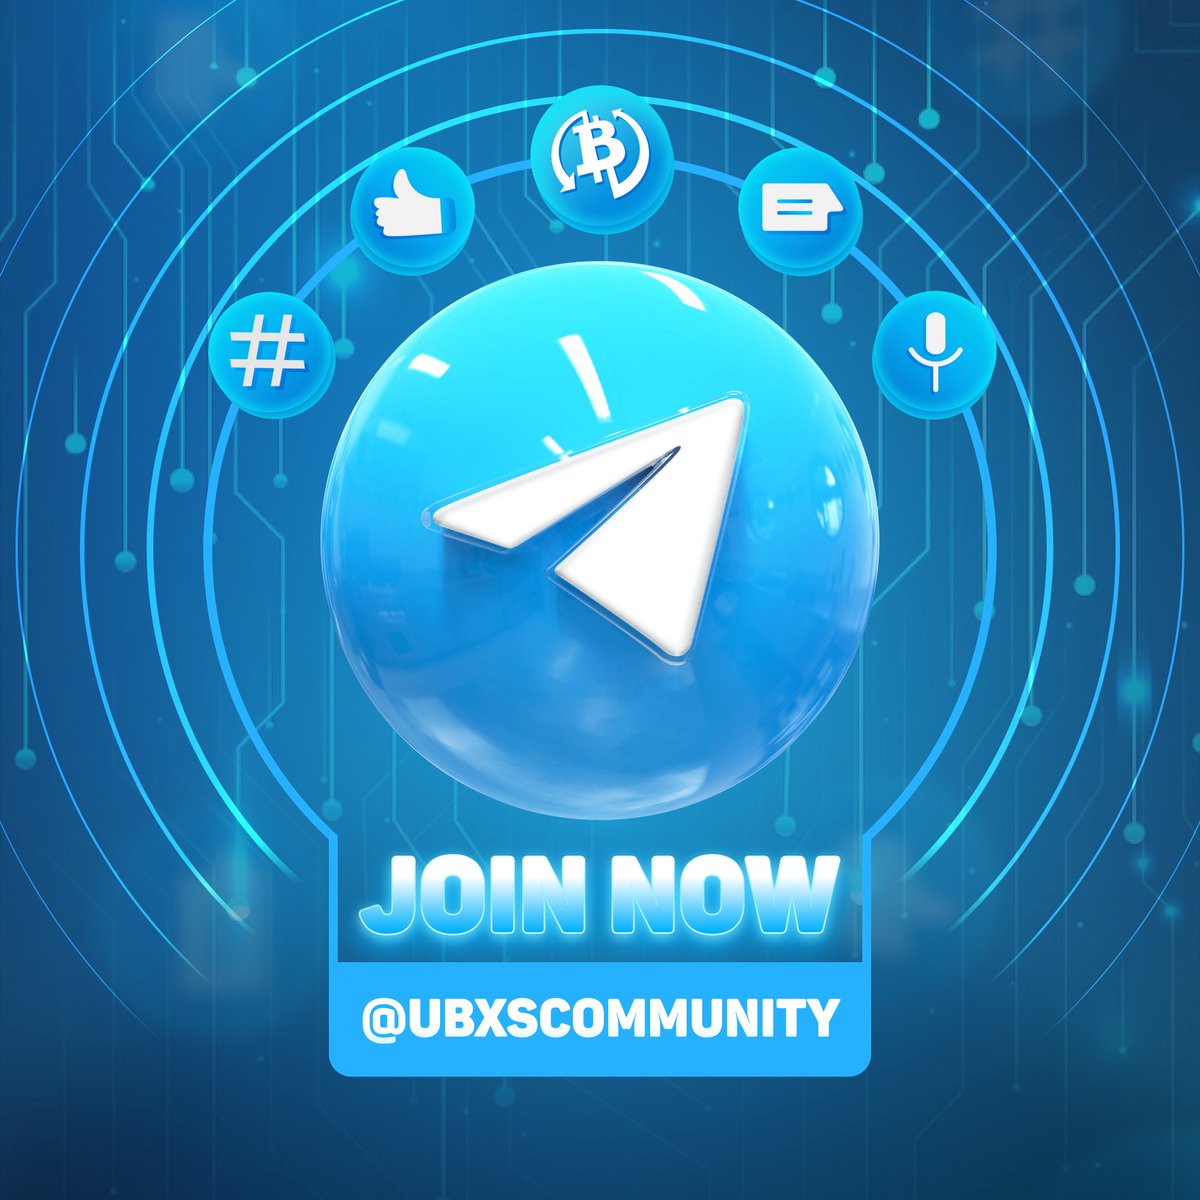 Haven't joined our Telegram community yet? Join our vibrant #RWA family and stay closely updated on #Bixos developments, chat with fellow community members, and more! t.me/ubxscommunity